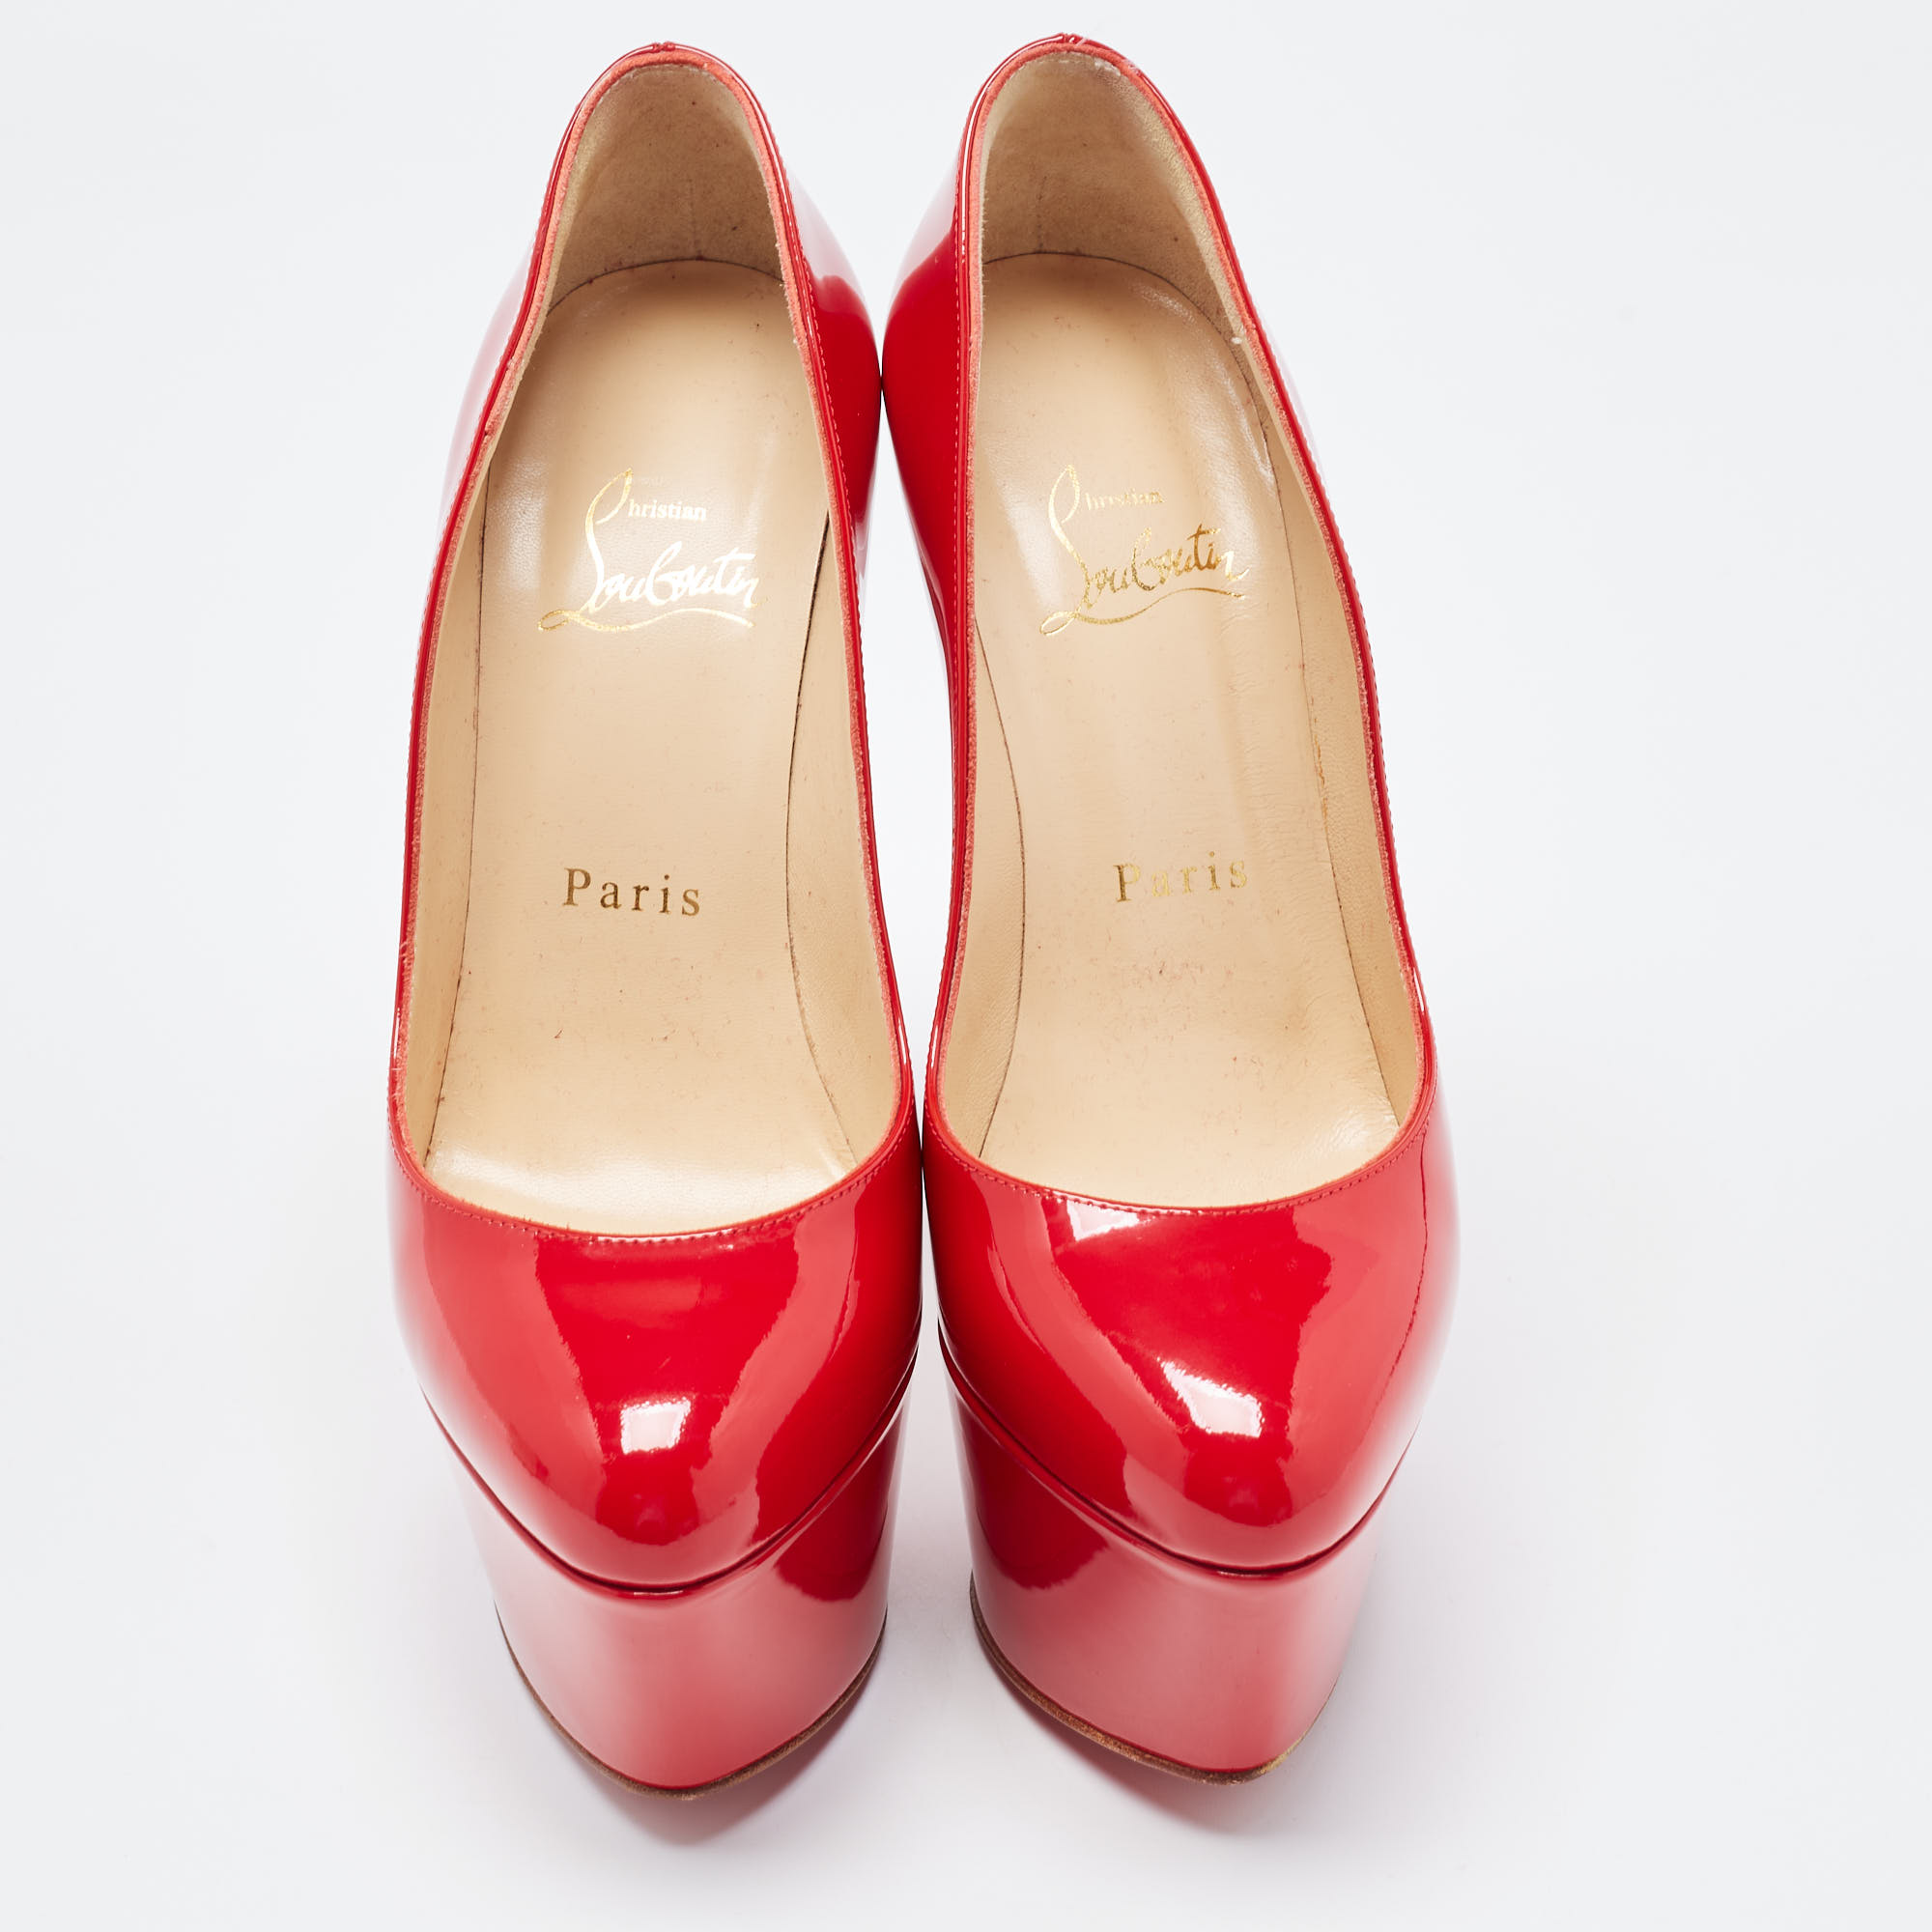 Christian Louboutin Red Patent Leather Victoria Platform Pumps Size 36